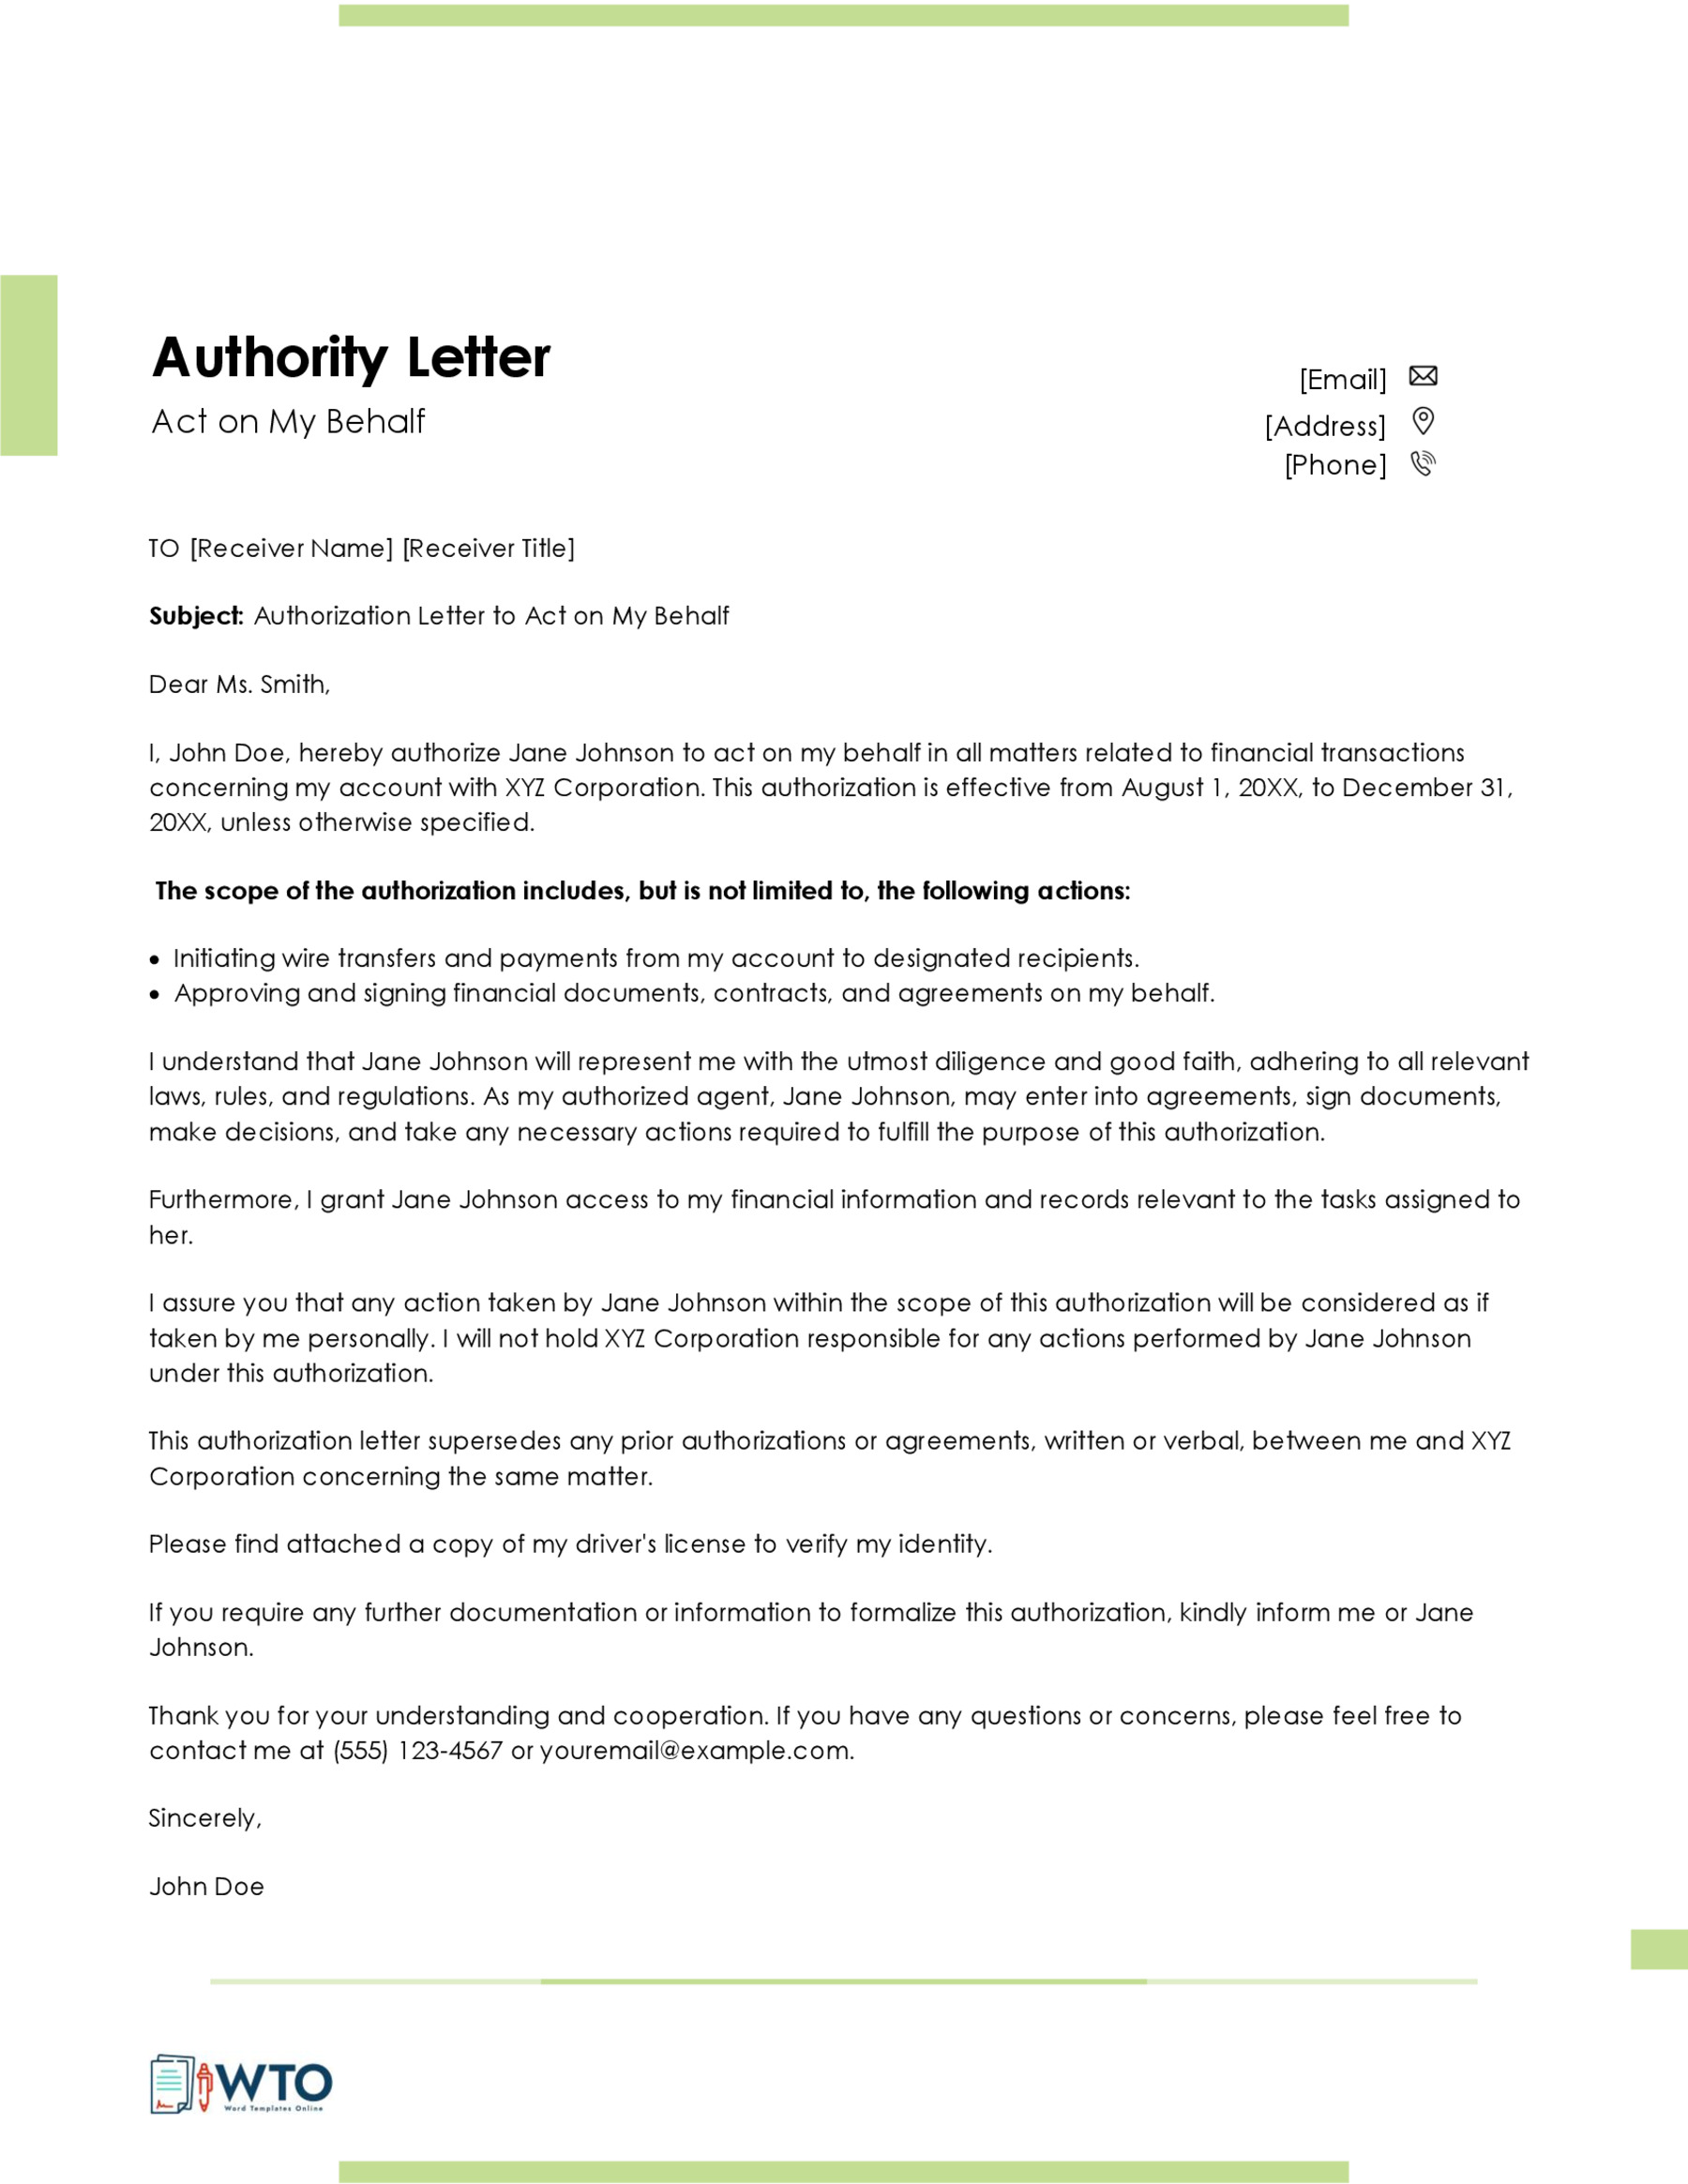 Authorization Letter to act Sample-Free Downloadable in word format